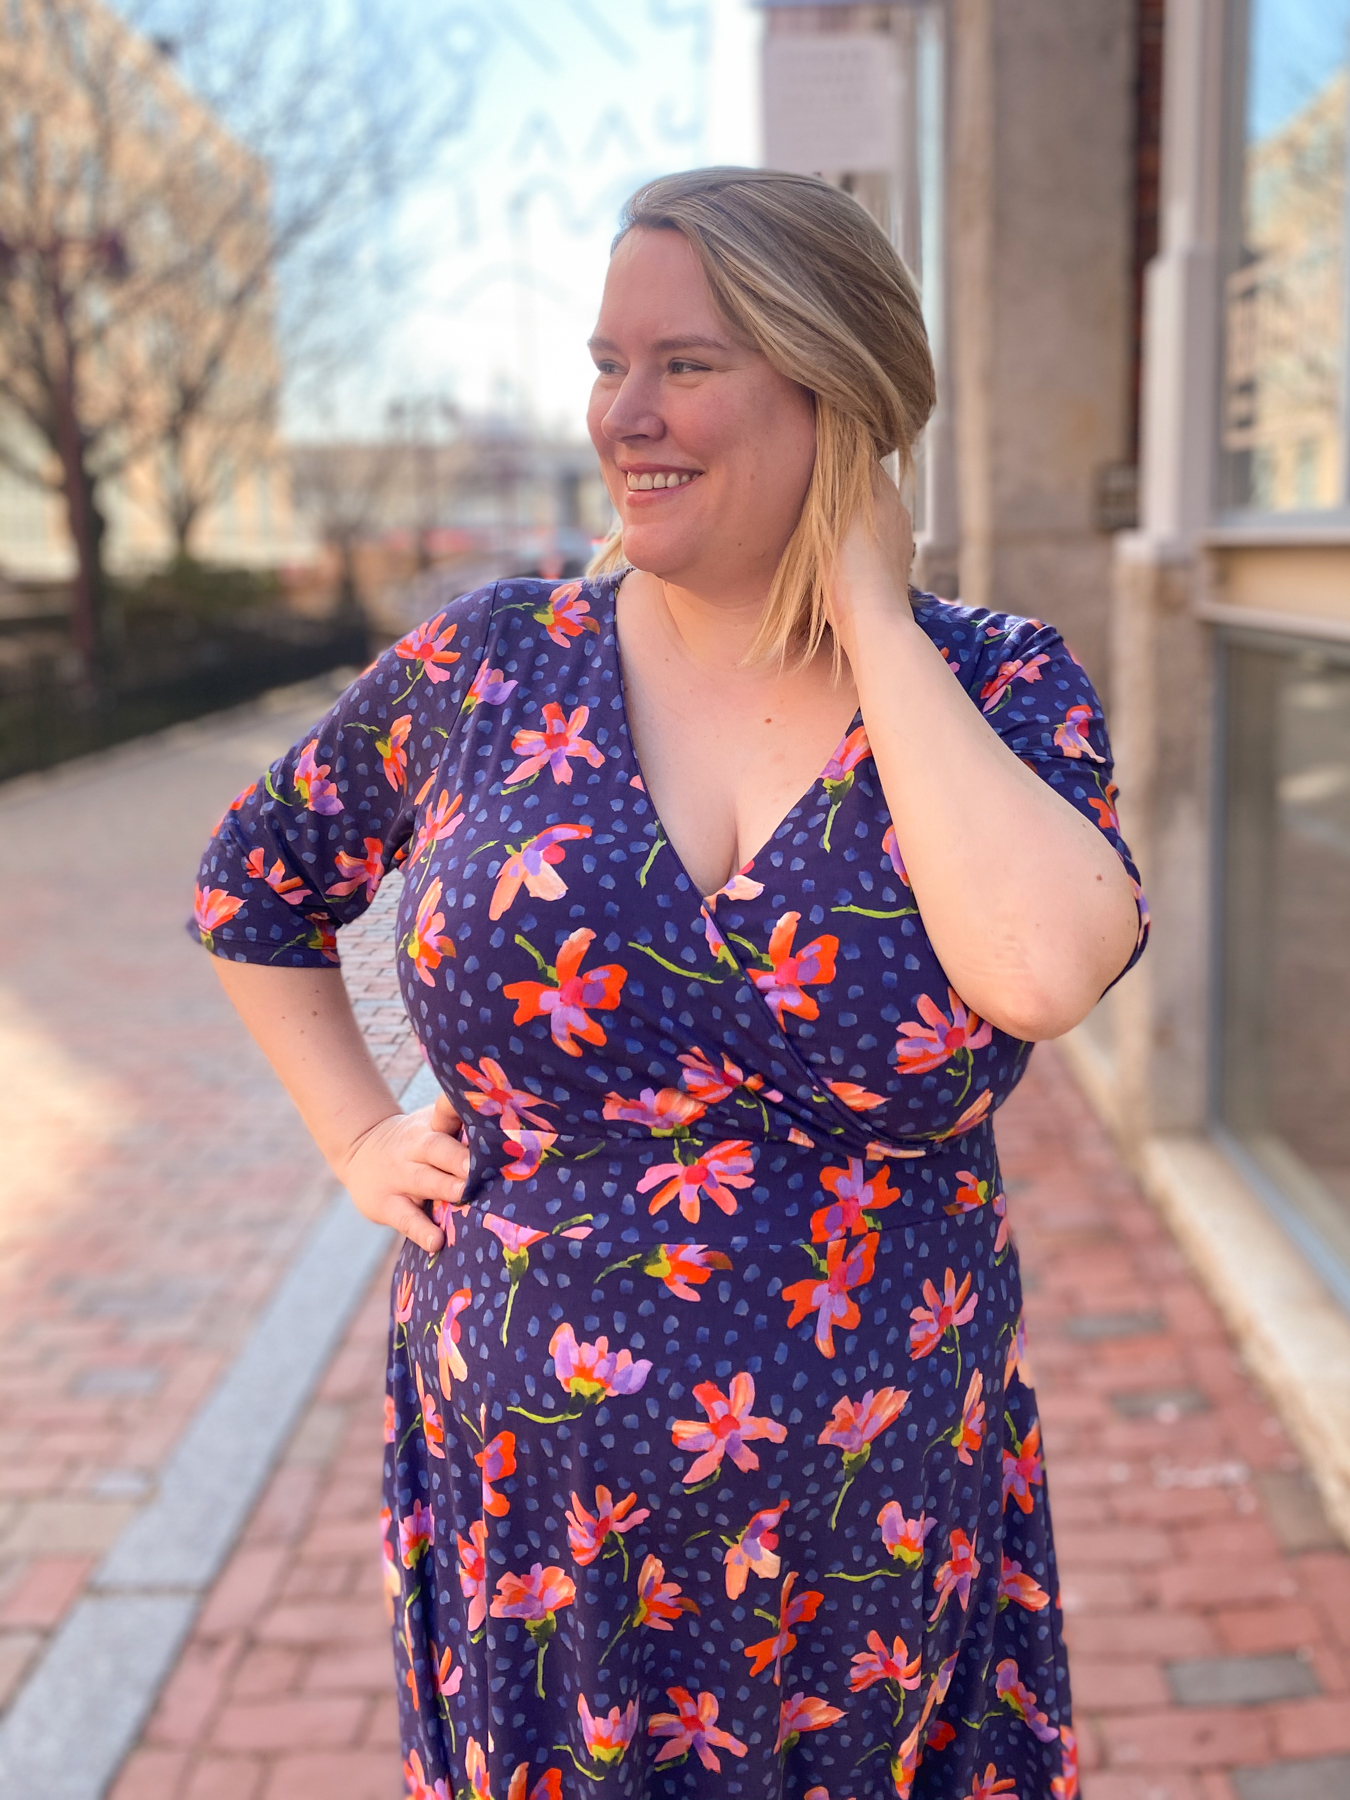 An everyday Alcott Dress for the busy Mum lifestyle | Cashmerette